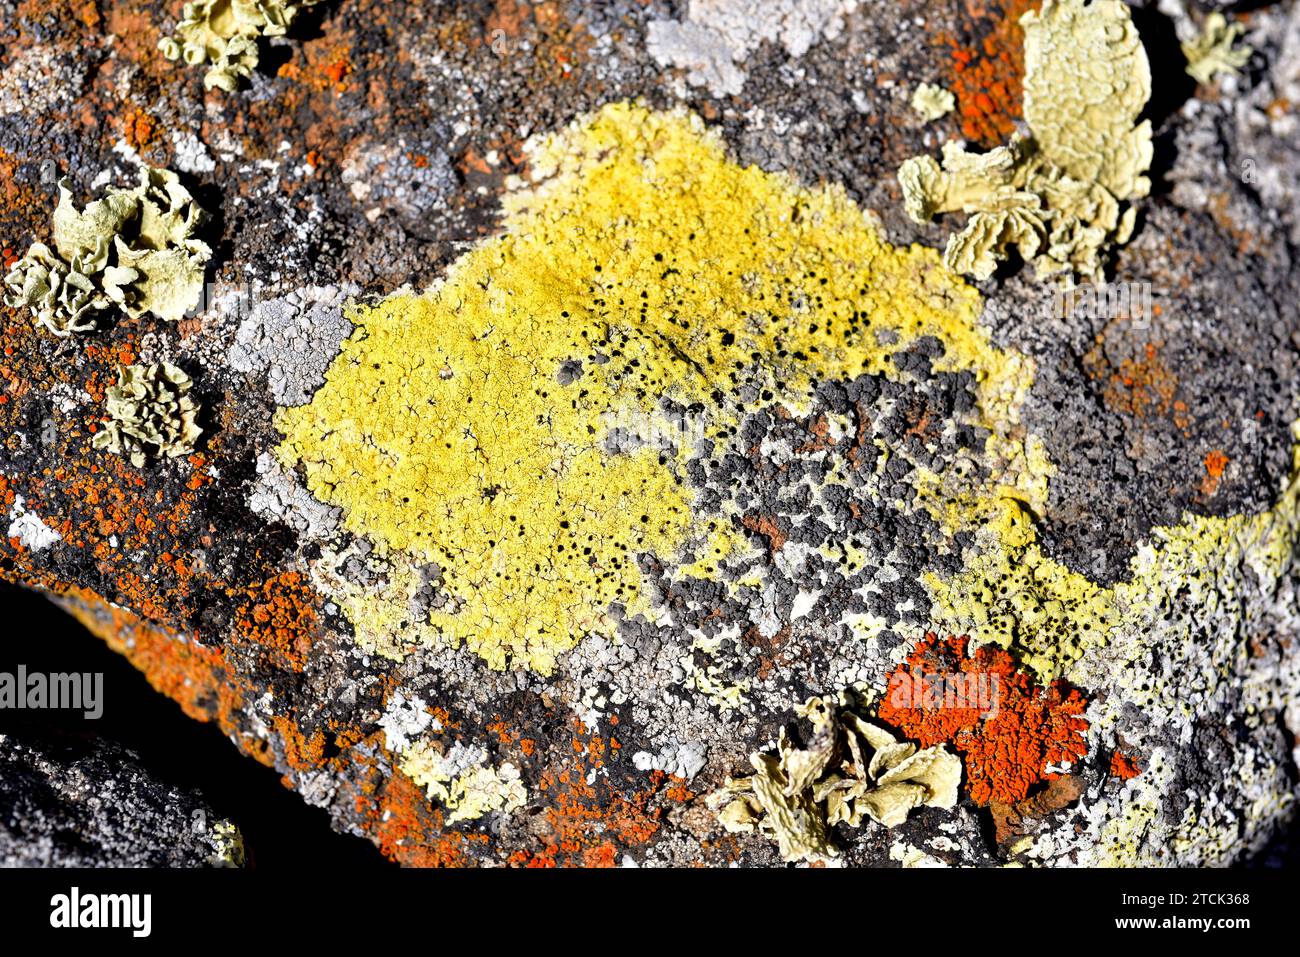 Acarospora hilaris is a yellow crustose lichen growing on volcanic rock. This photo was taken in Lanzarote Island, Canary Islands, Spain. Stock Photo